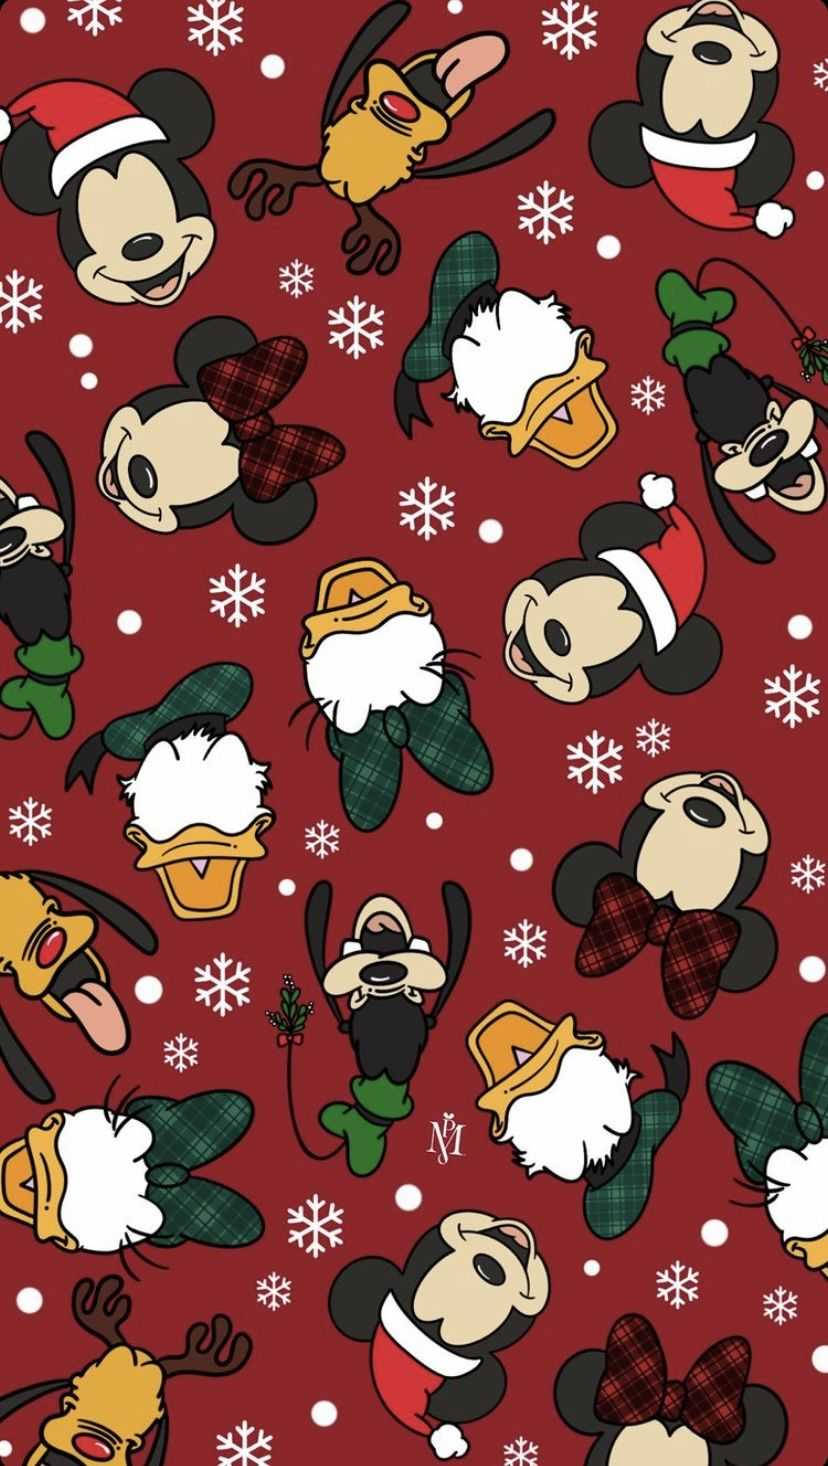 Disney Christmas With Goody And Donald Wallpaper